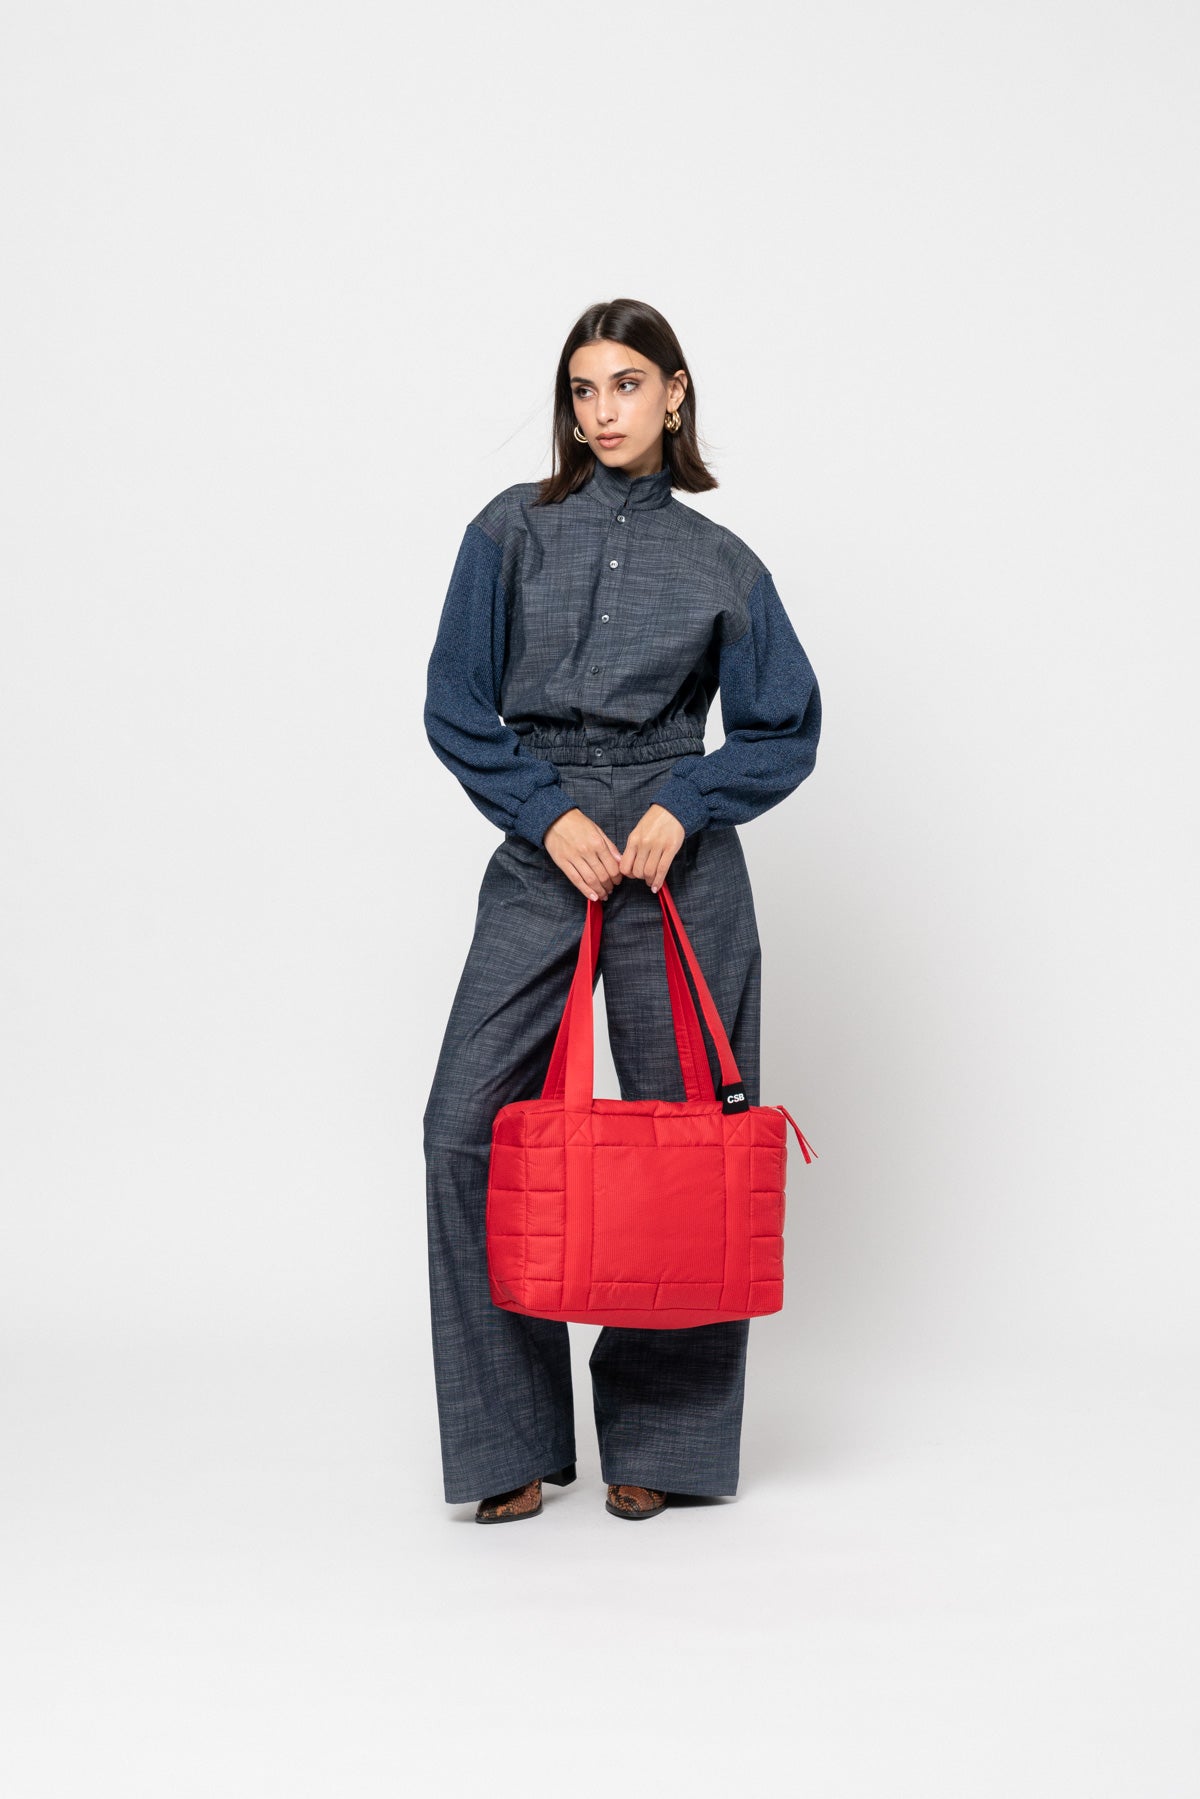 The Midi Blood Red Puffer Bag